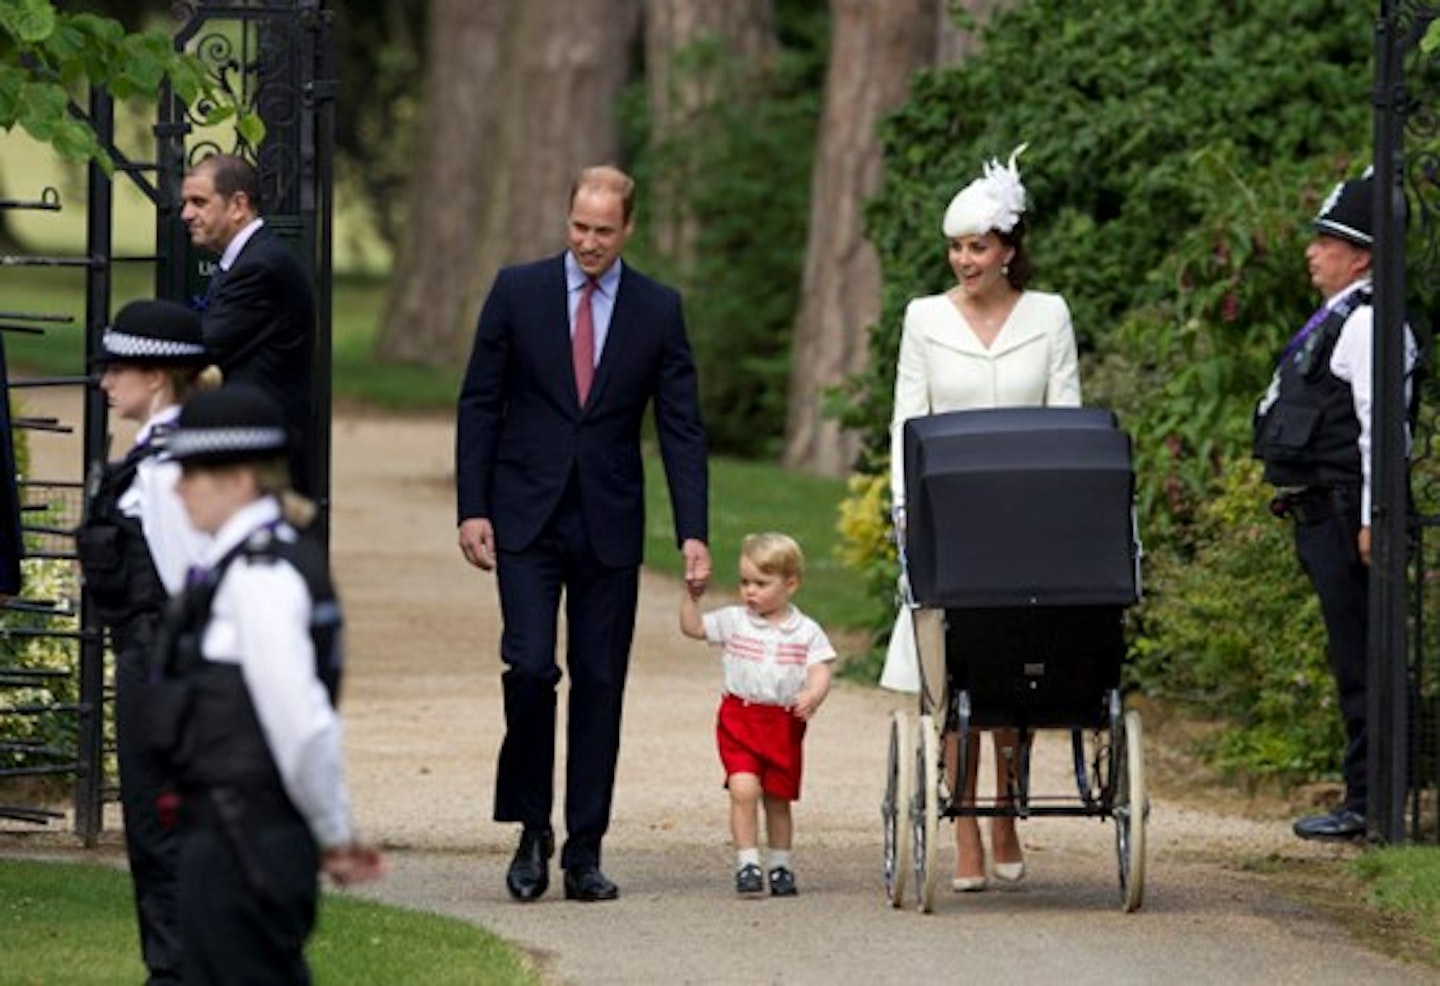 Prince William and Kate Middleton with Silver Cross pram